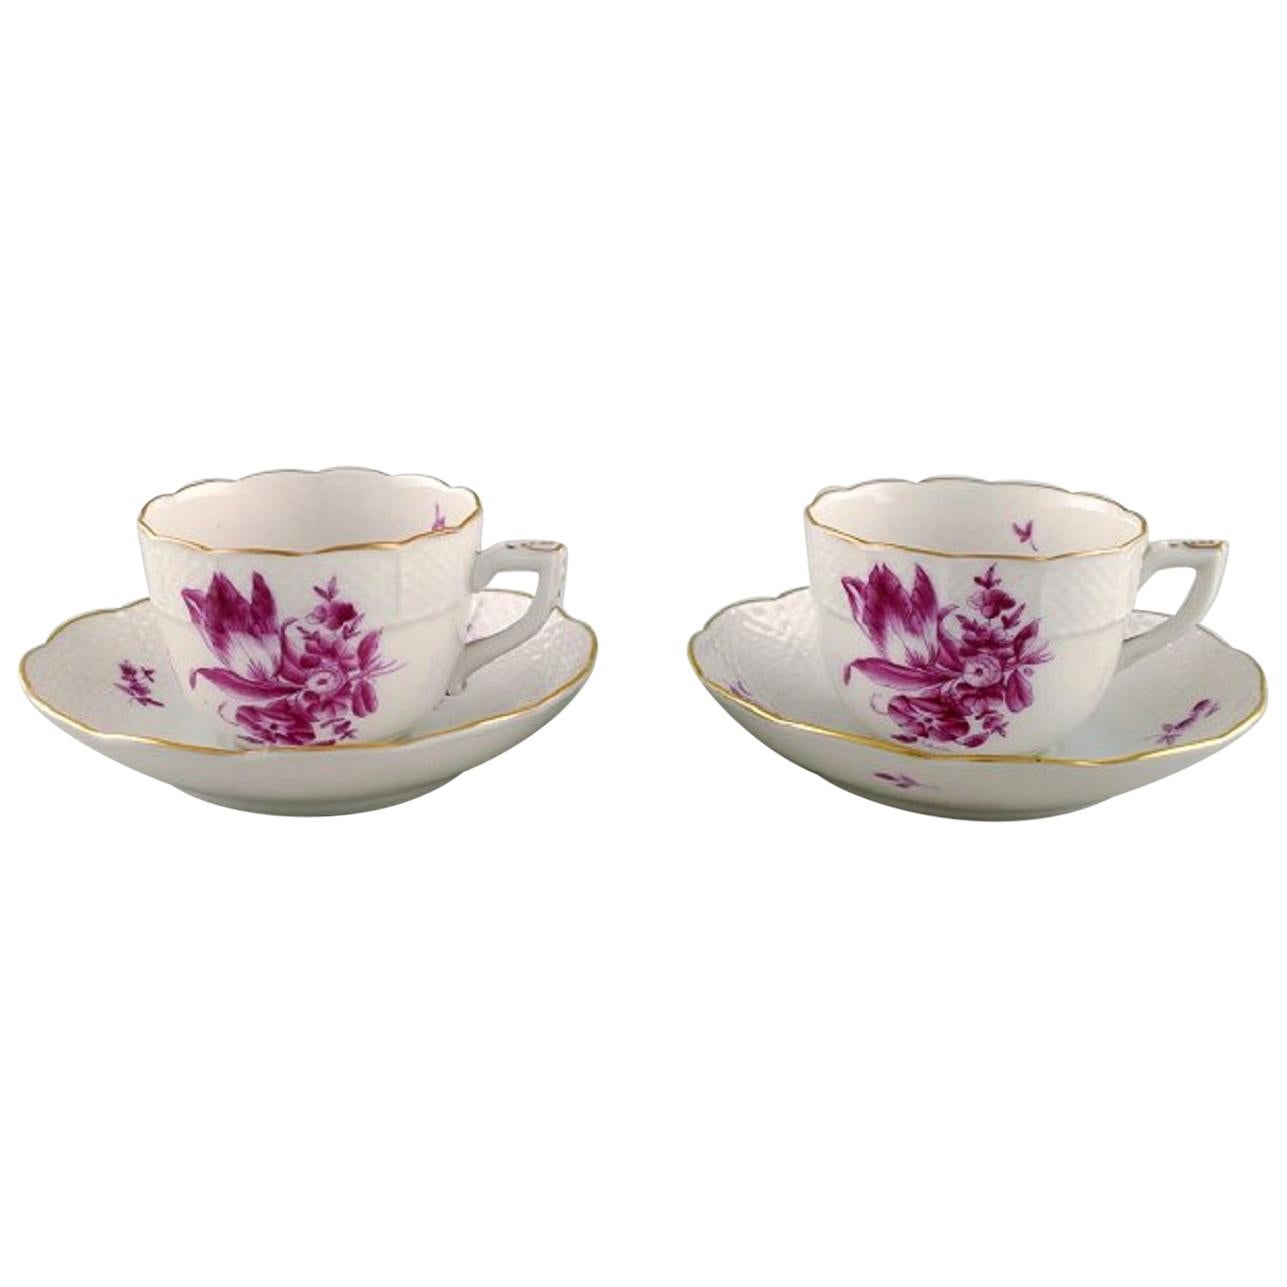 Two Herend Coffee Cups with Saucers in Hand Painted Porcelain, 1950s